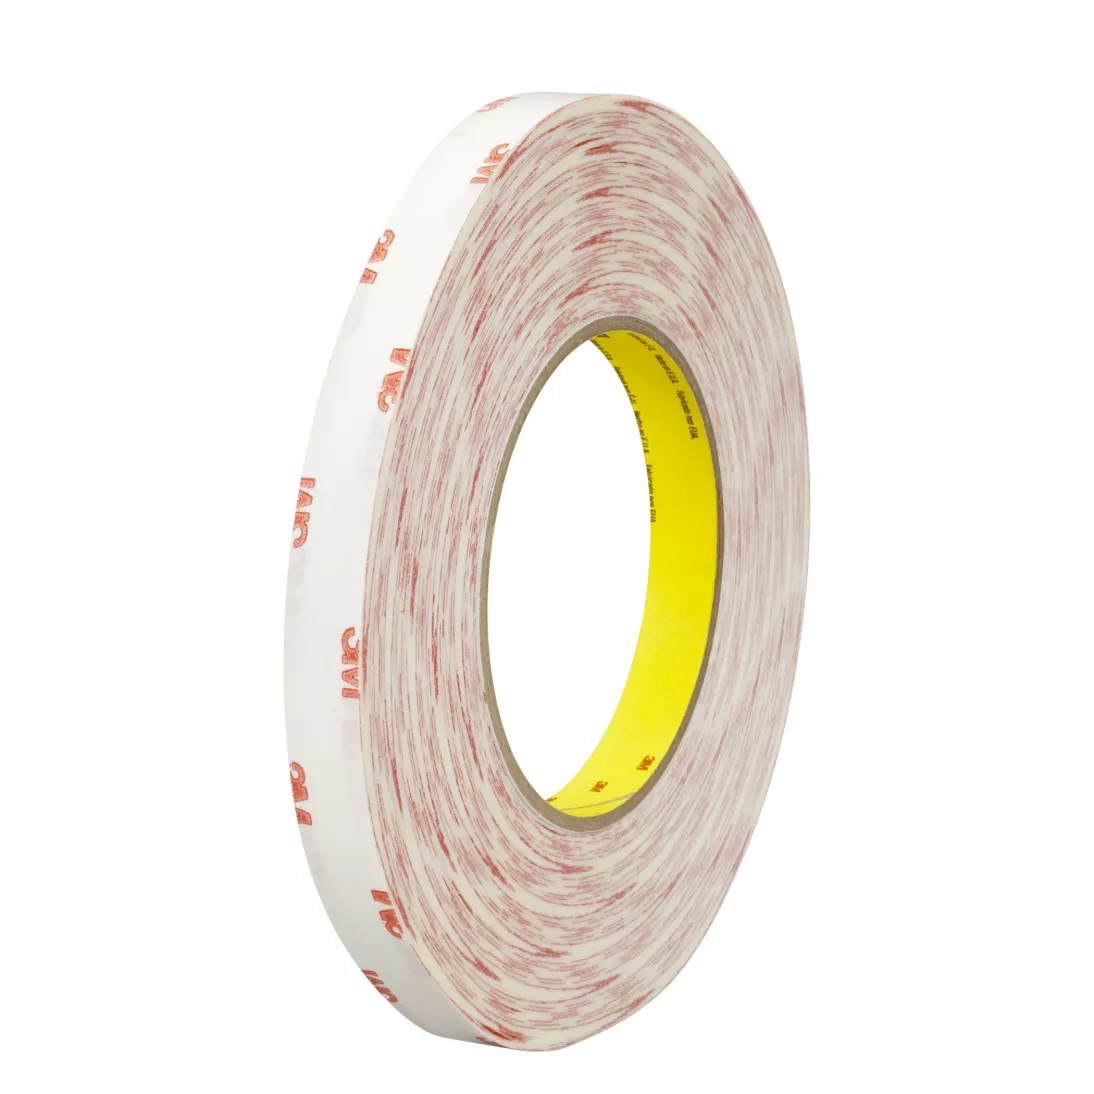 3M™ Double Coated Tissue Tape 9456, Clear, 2 in x 72 yd, 4 mil, 24 rolls
per case